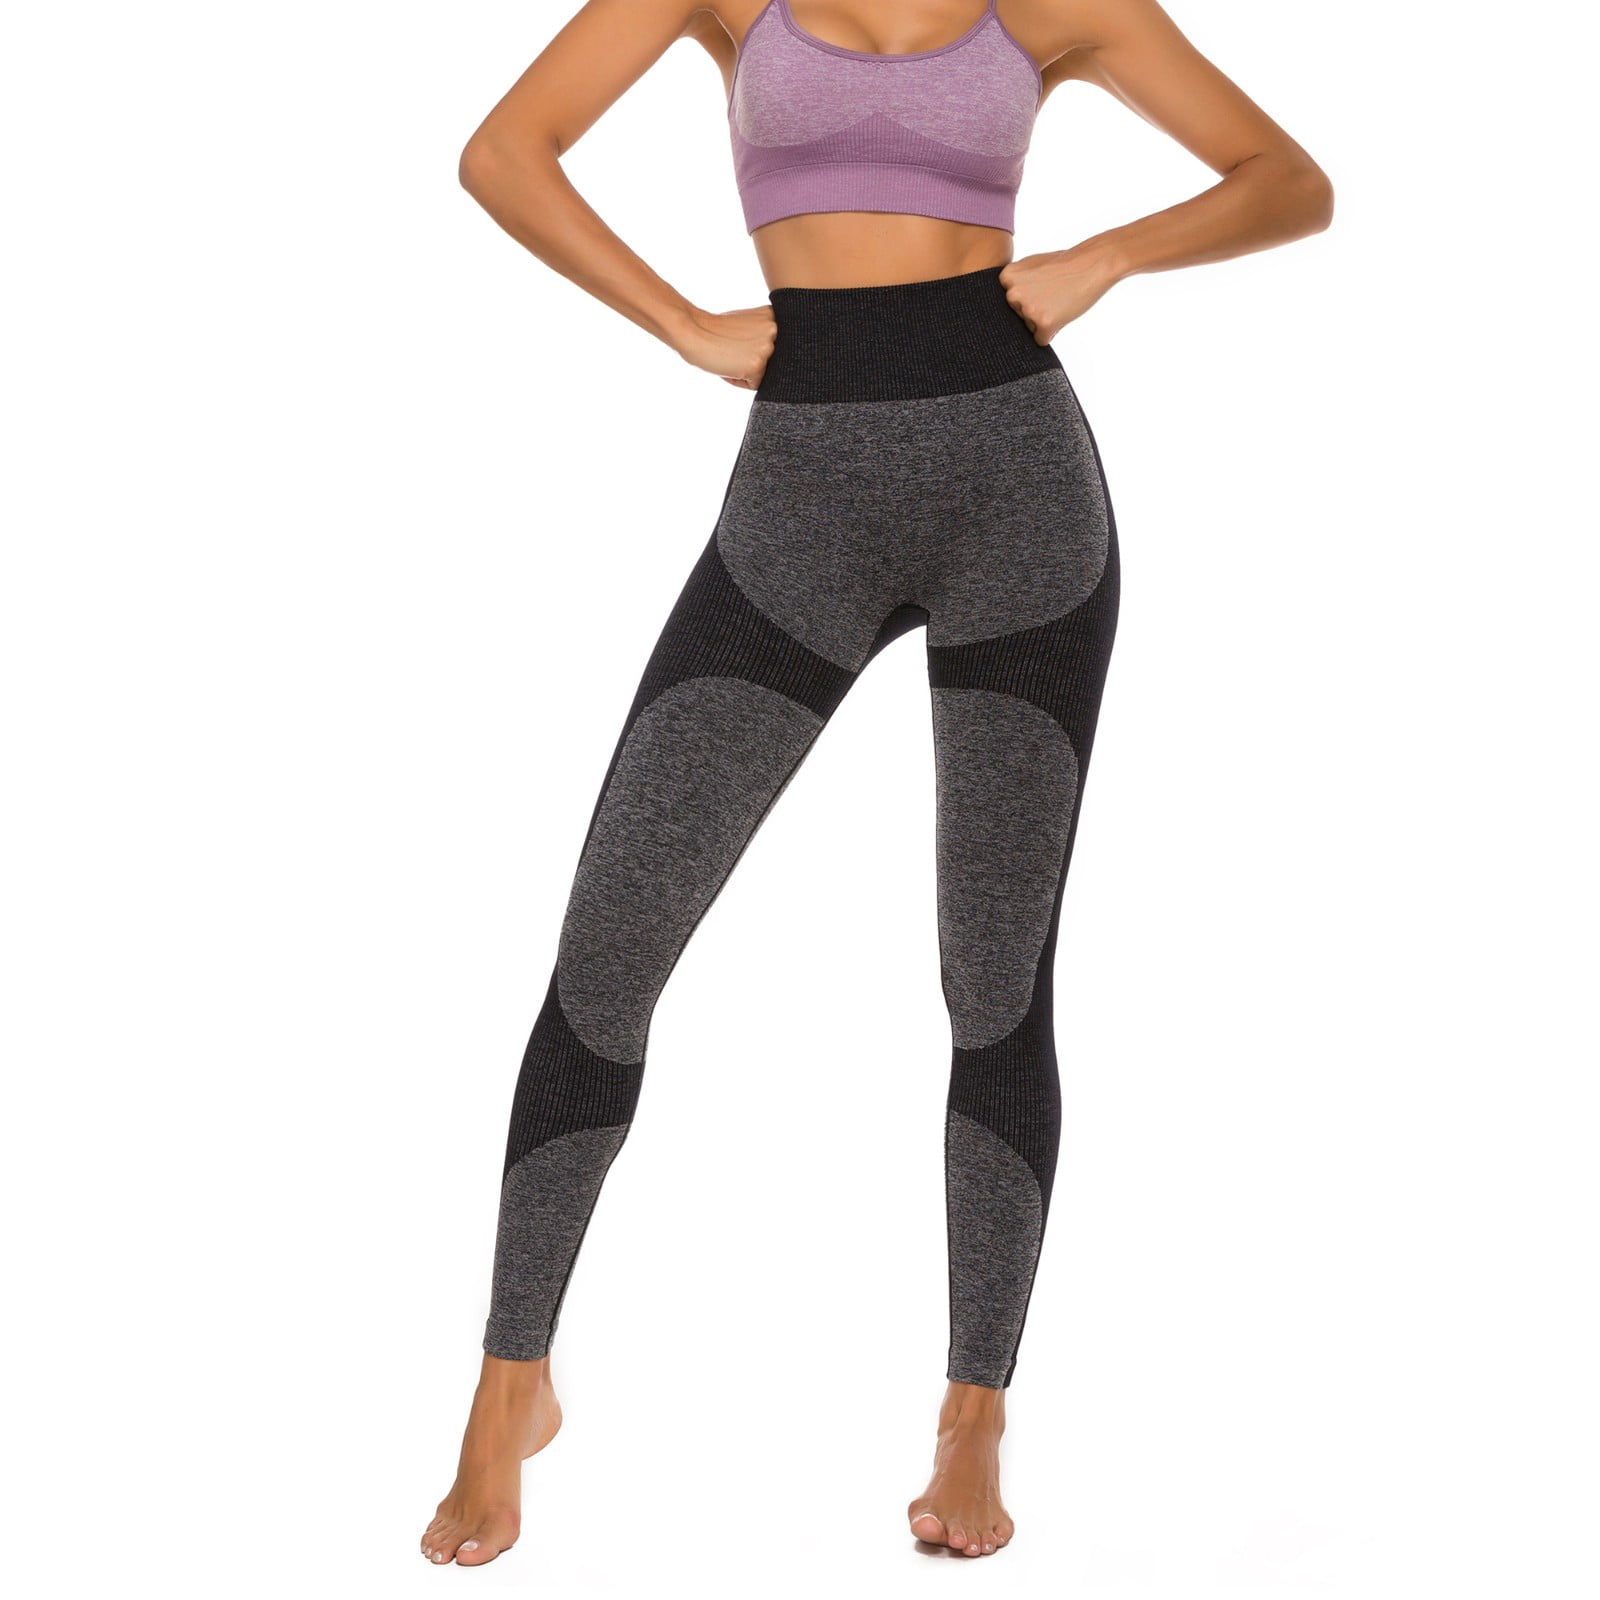 FITTOO Womens Butt Lift Ruched Yoga Pants Sport Pants Workout